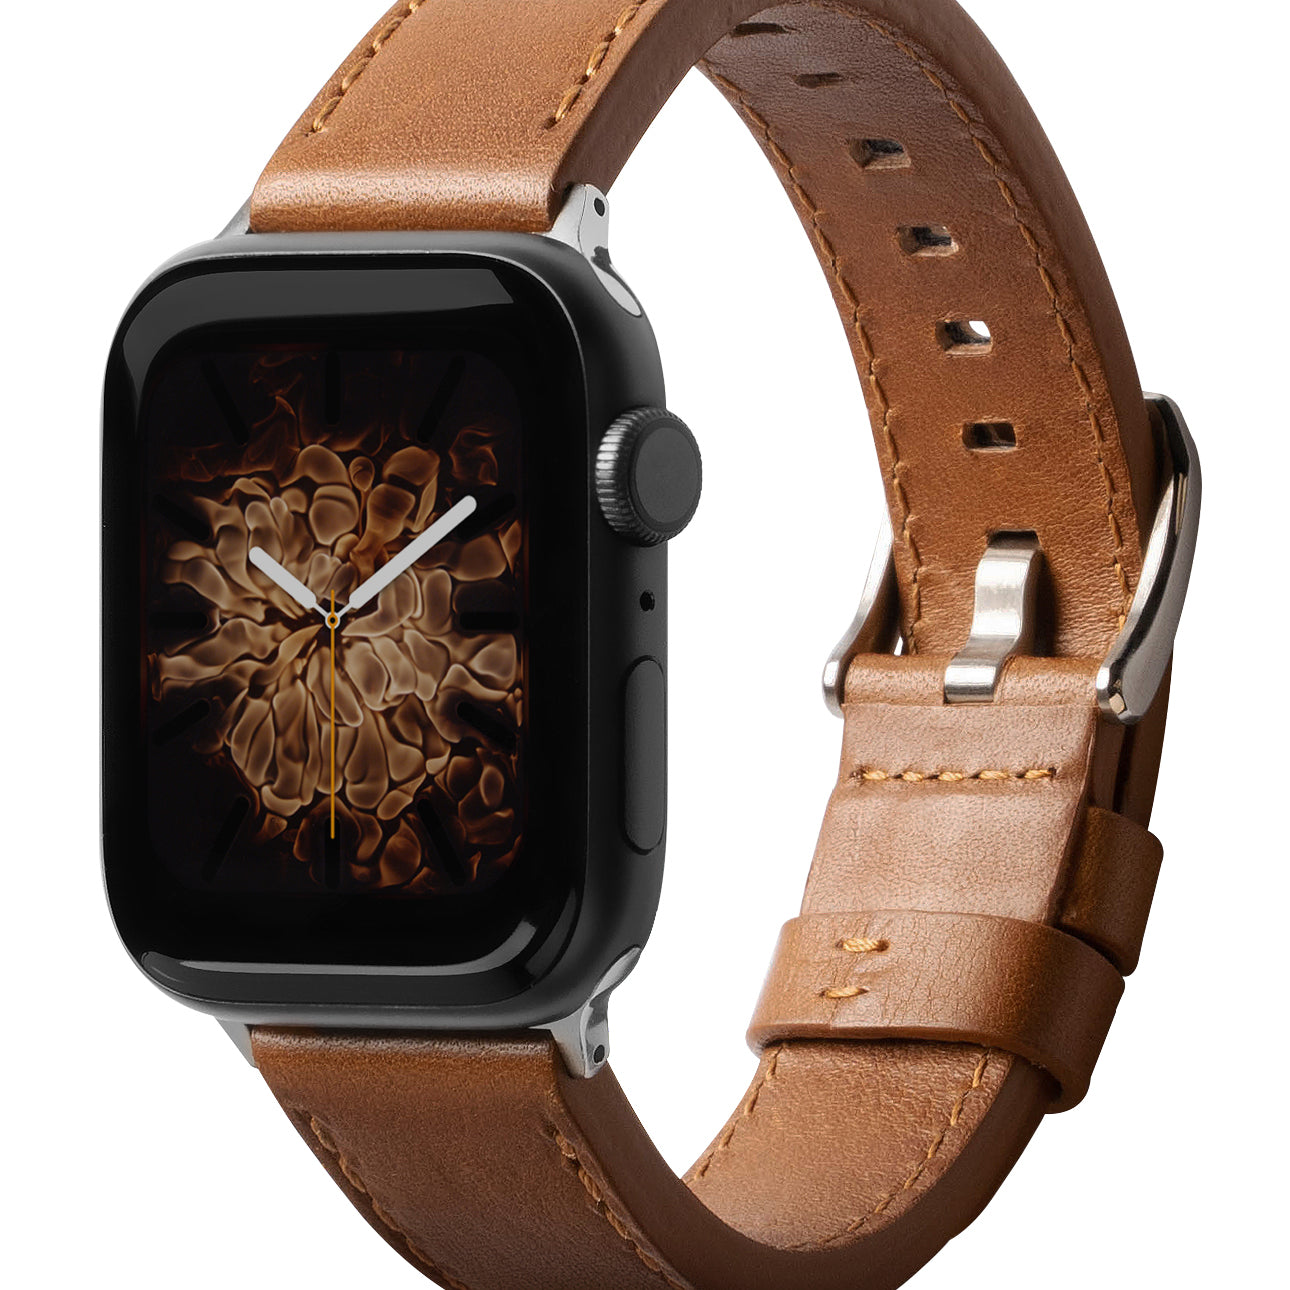 Ringke Leather One Classic Watch Band for Apple Watch 1/2/3 (42mm) - brown